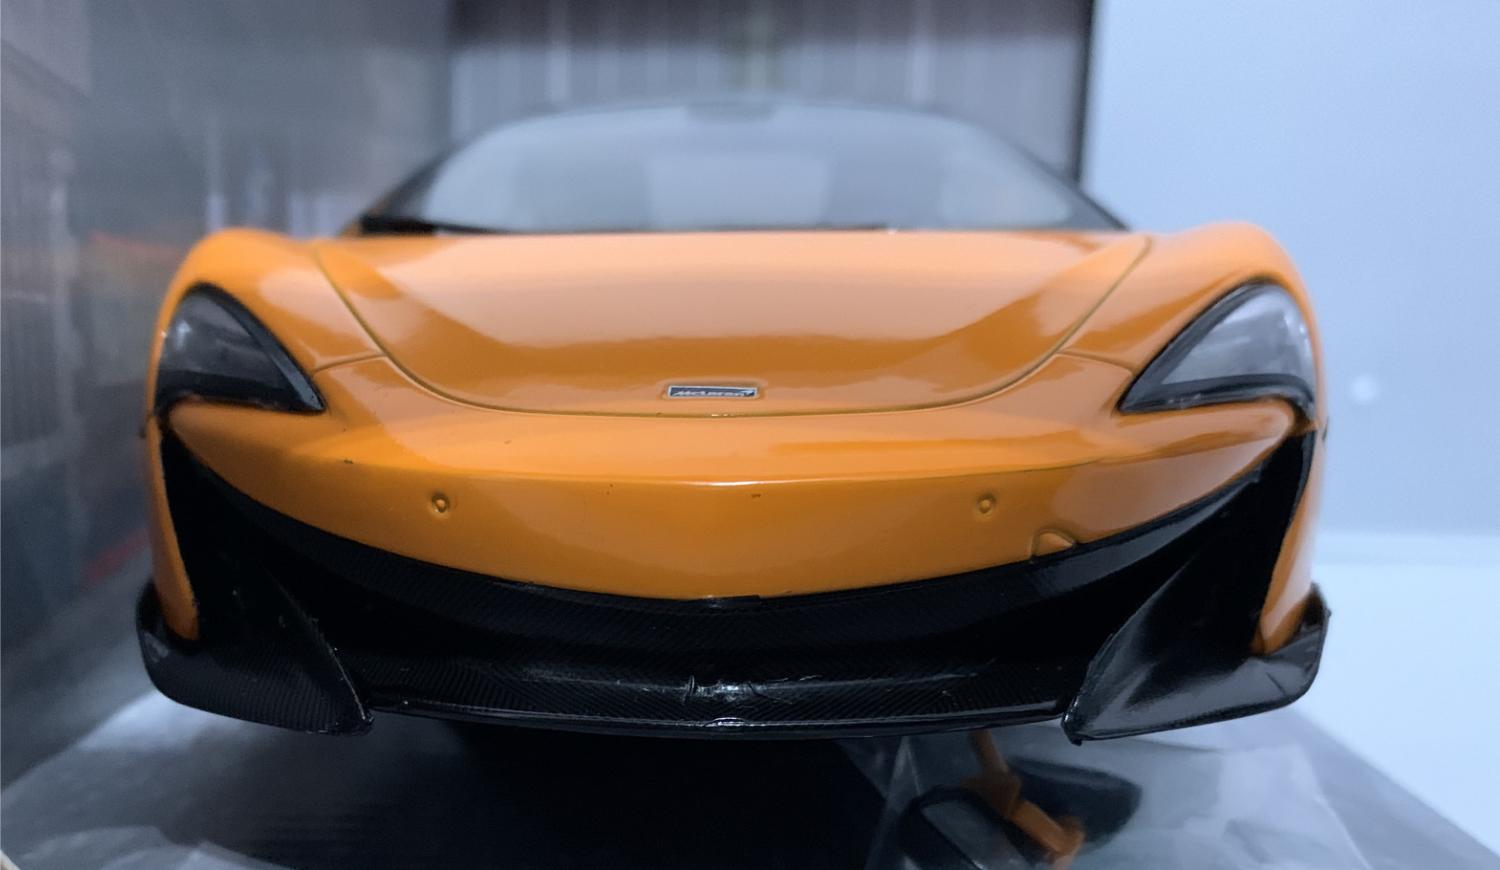 A very good representation of the McLaren 600LT decorated in orange with black roof, rear spoiler